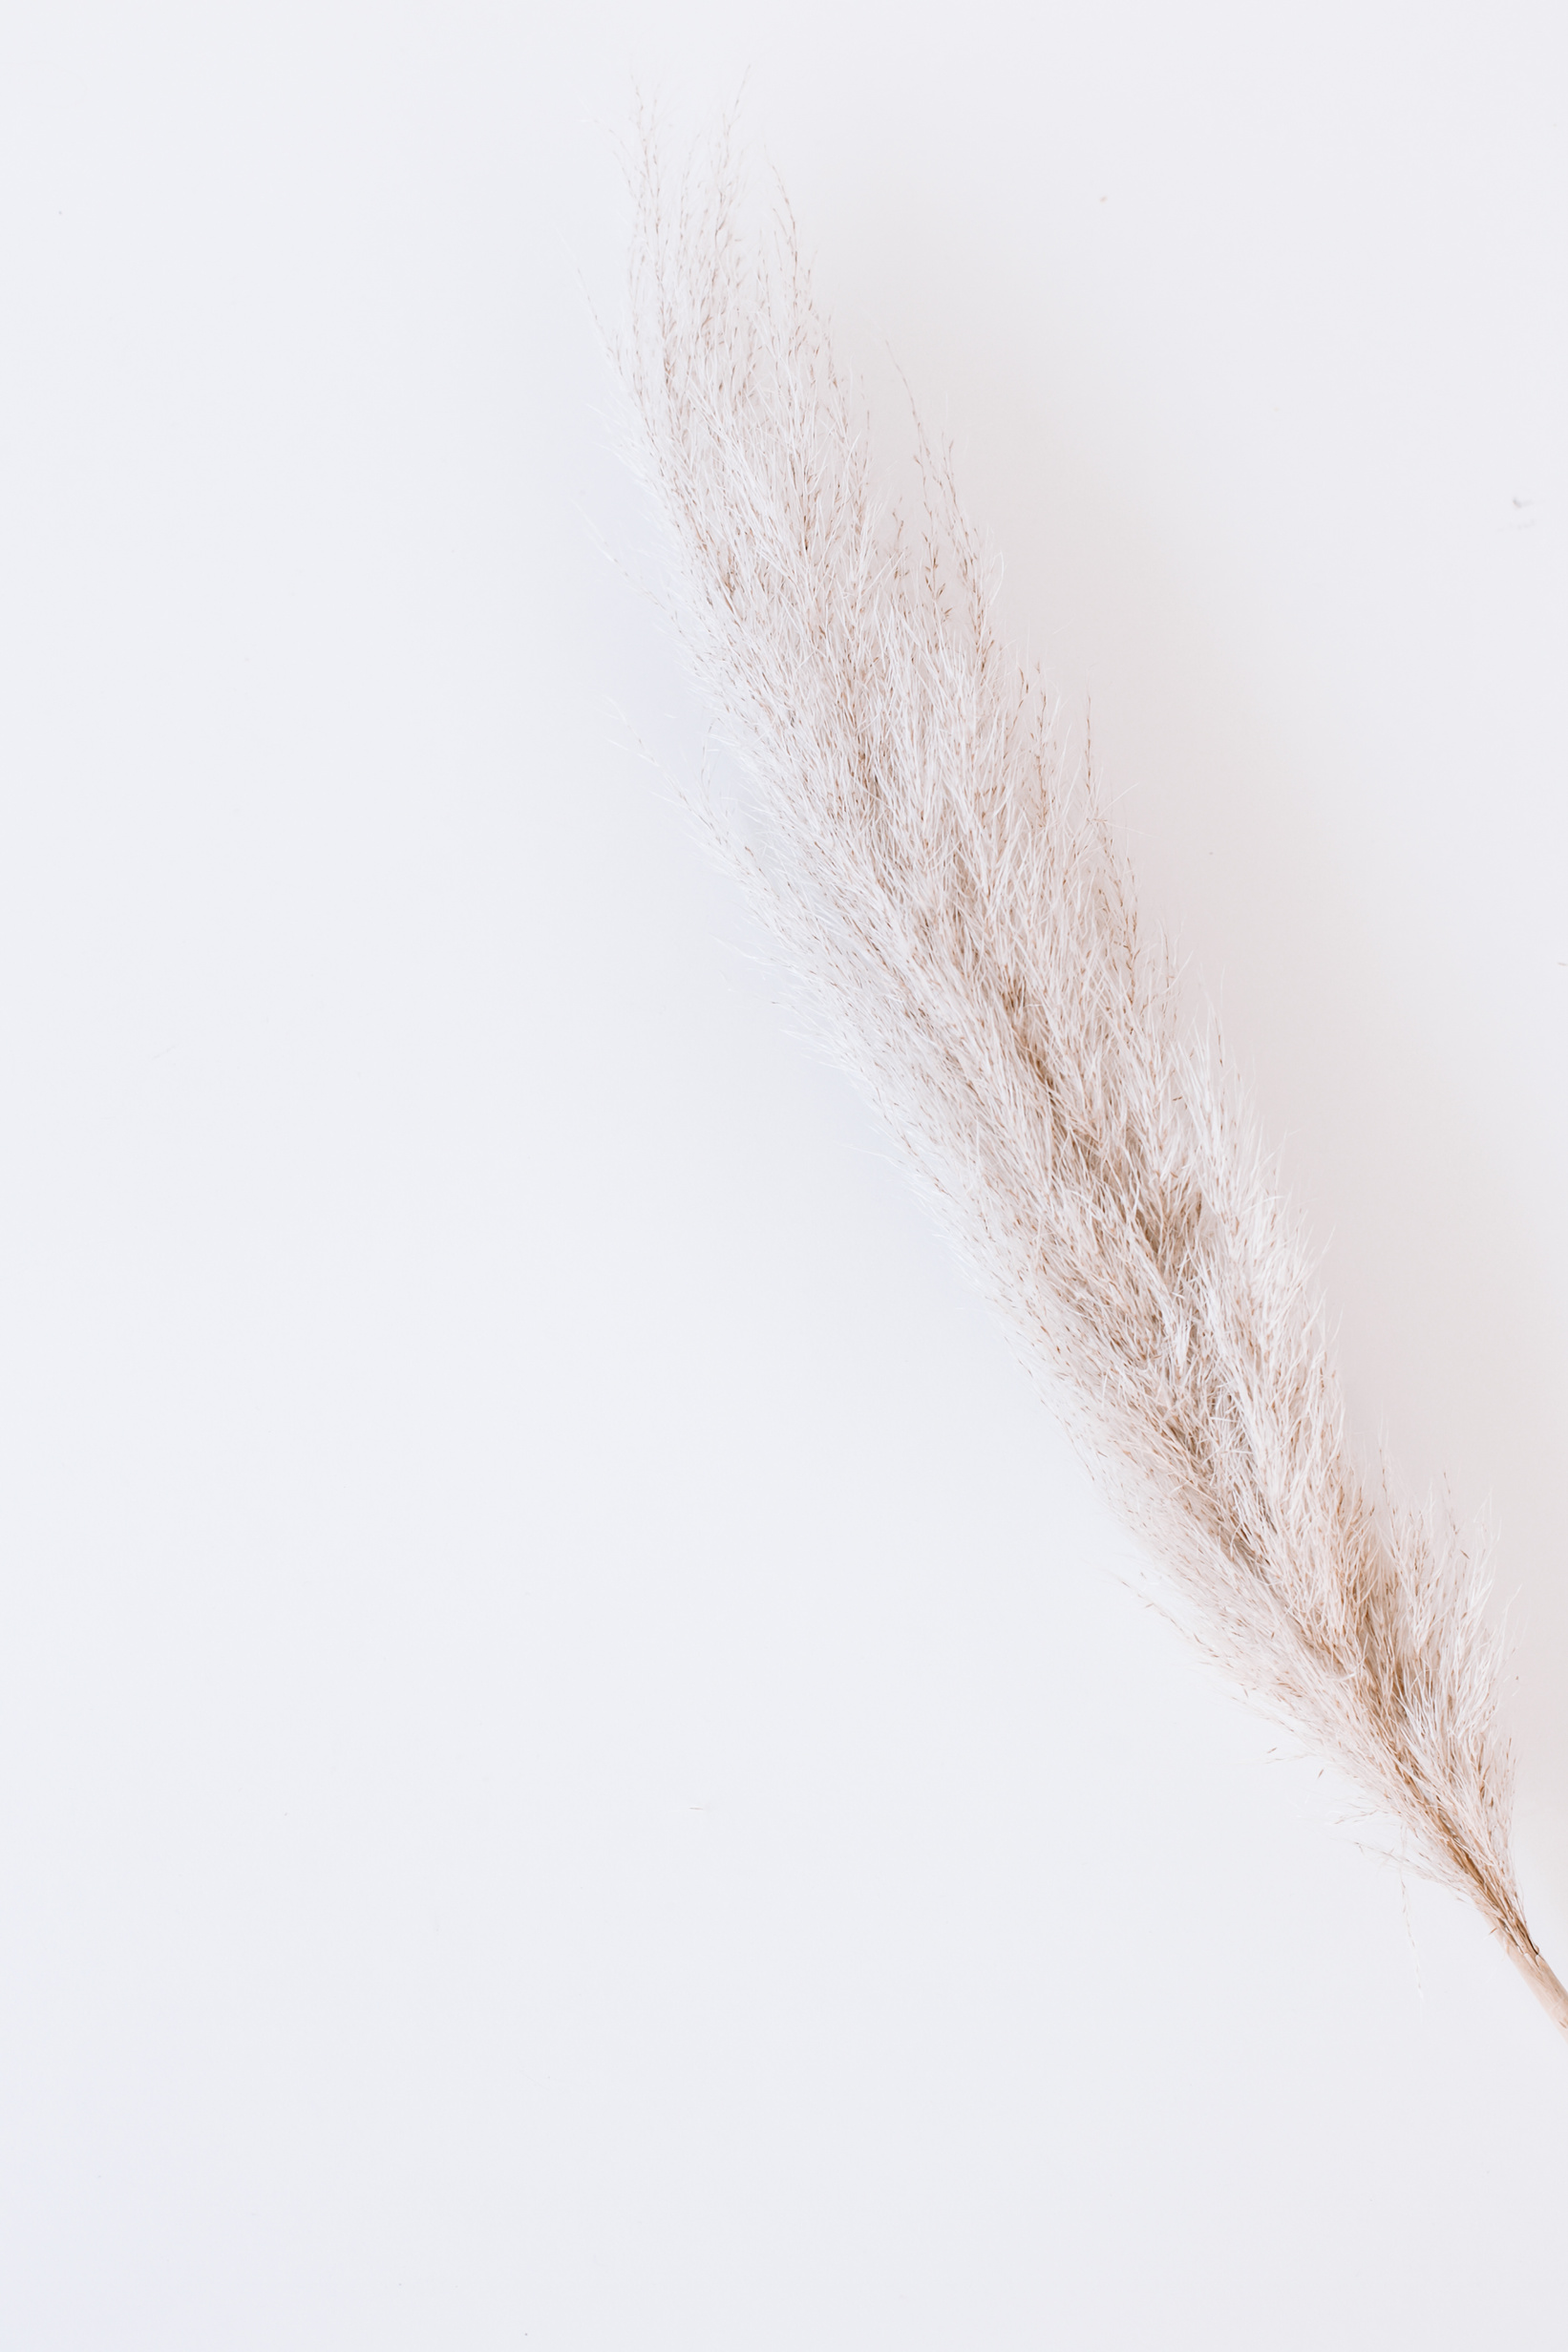 Pampas Grass in a White Background